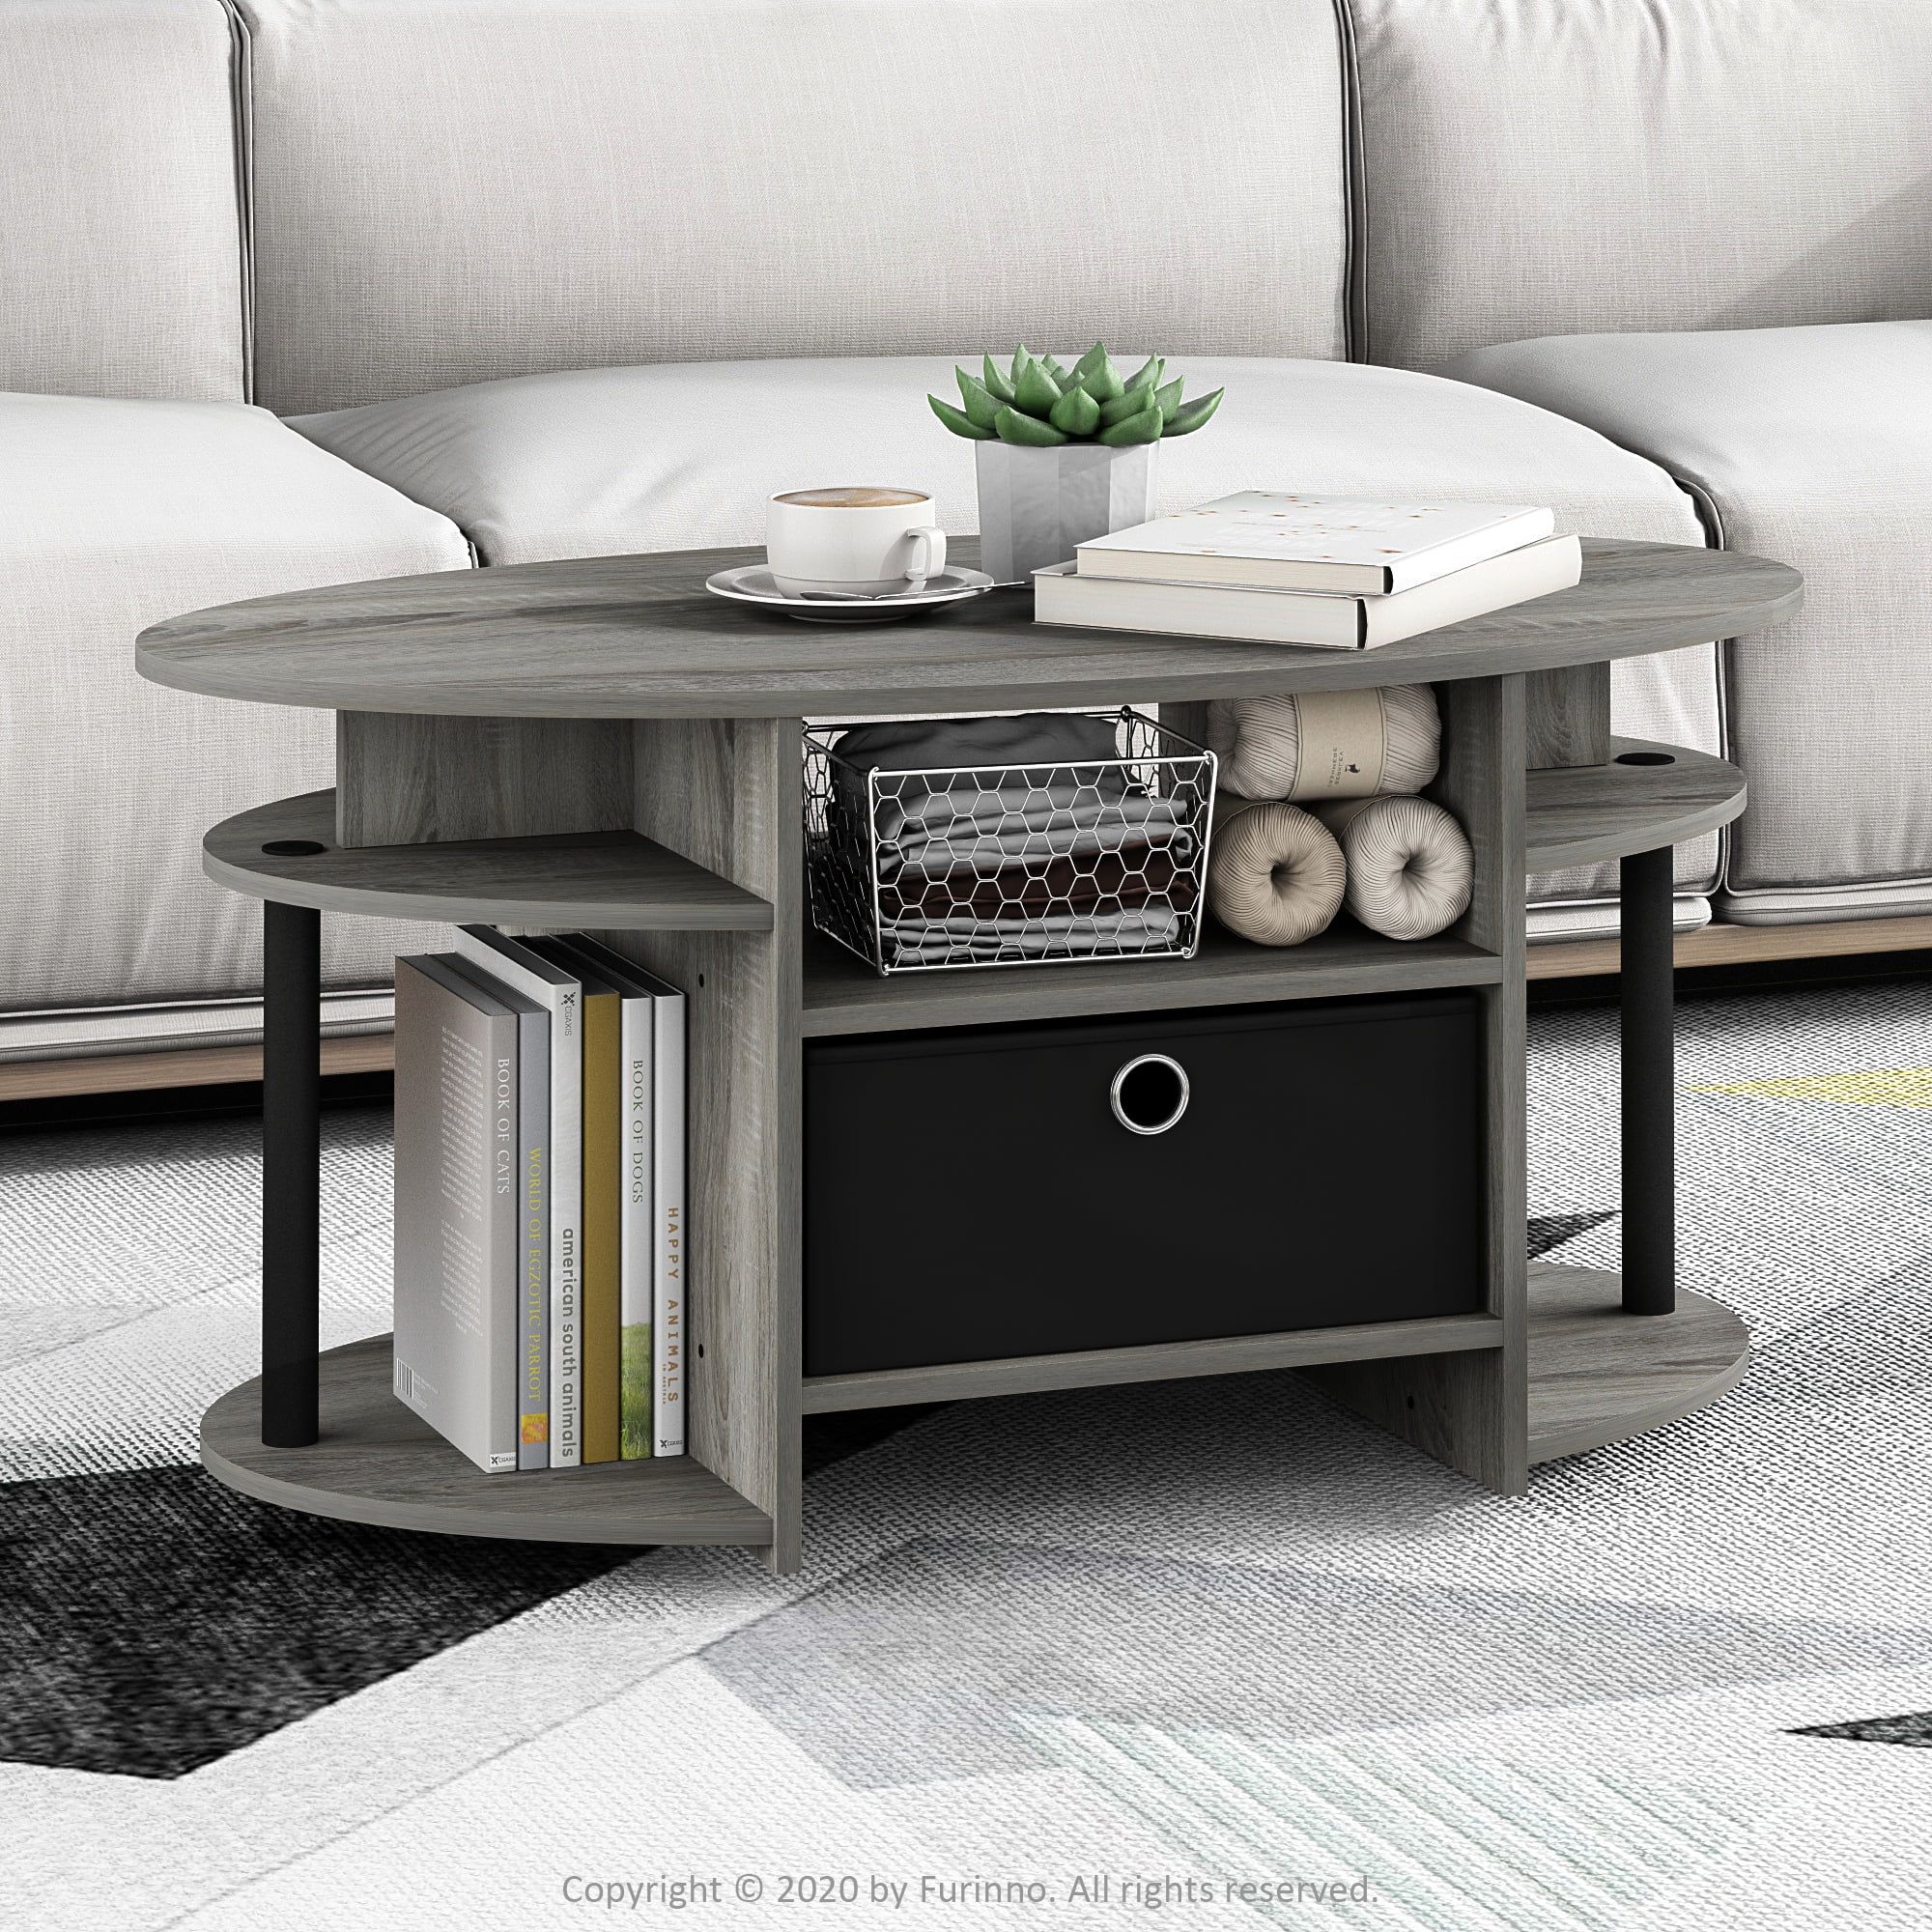 Furinno Jaya Simple Design Oval Coffee Table With Bin, French Oak Grey Regarding Simple Design Coffee Tables (View 8 of 15)